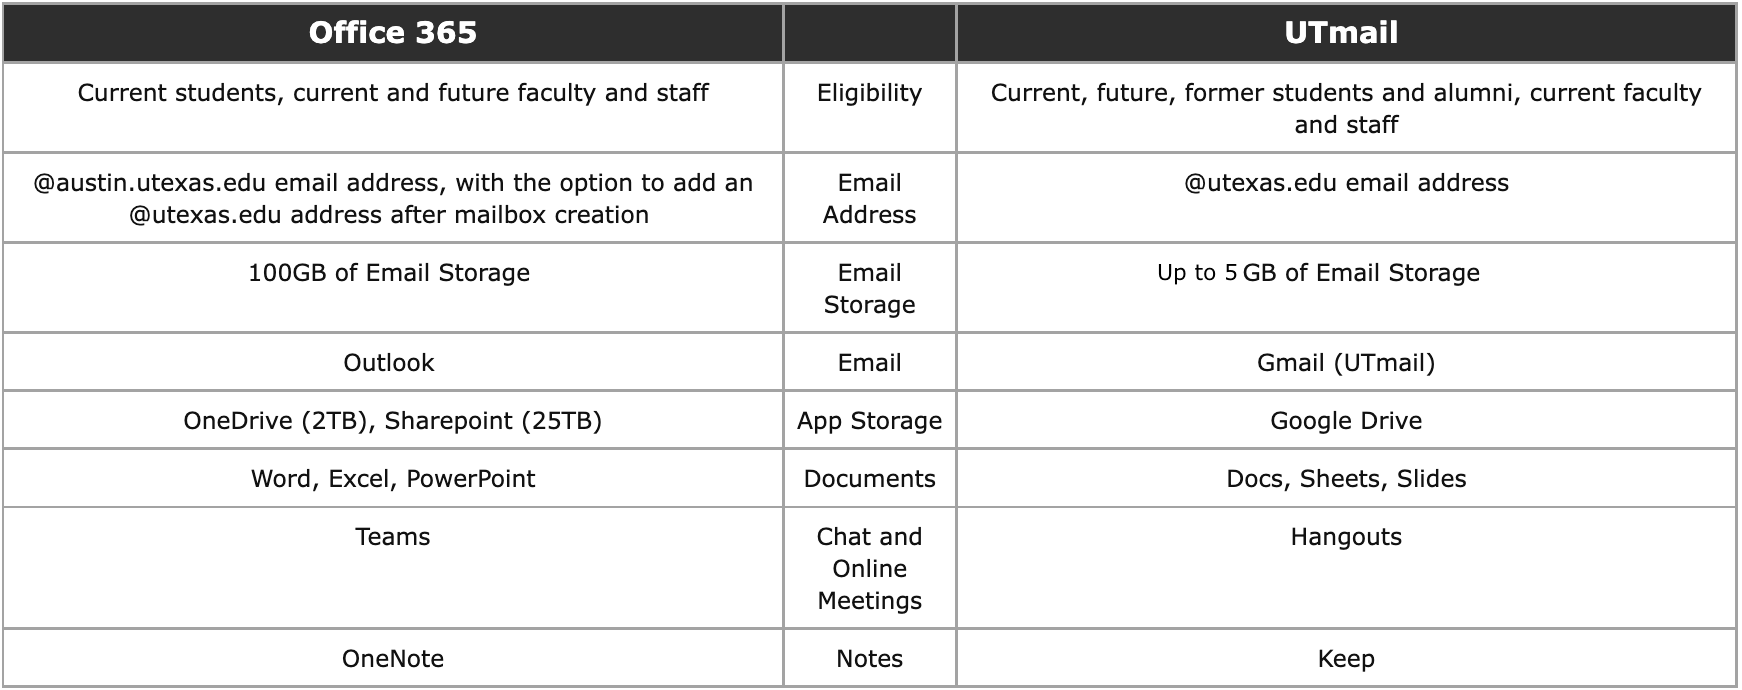 O365 & UTmail Features